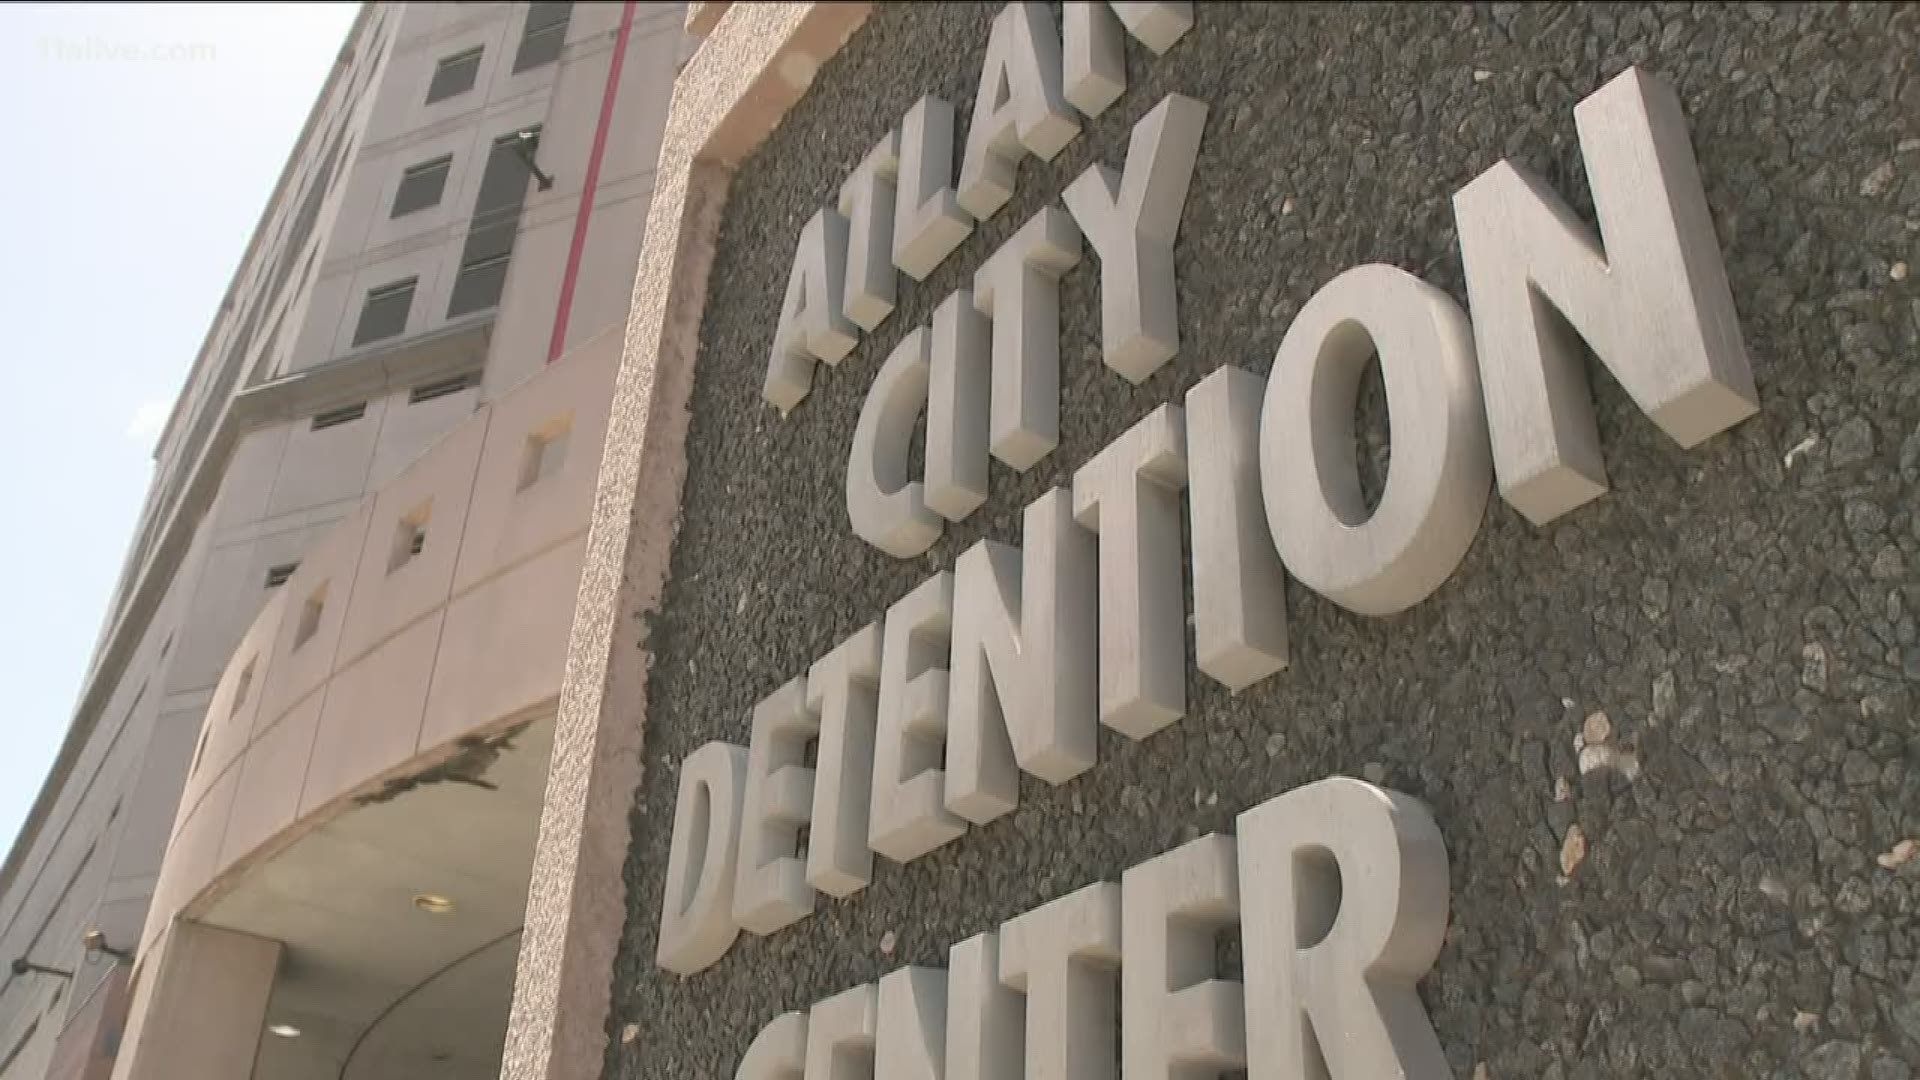 The city is looking at ways to repurpose the Downtown city jail into something else.